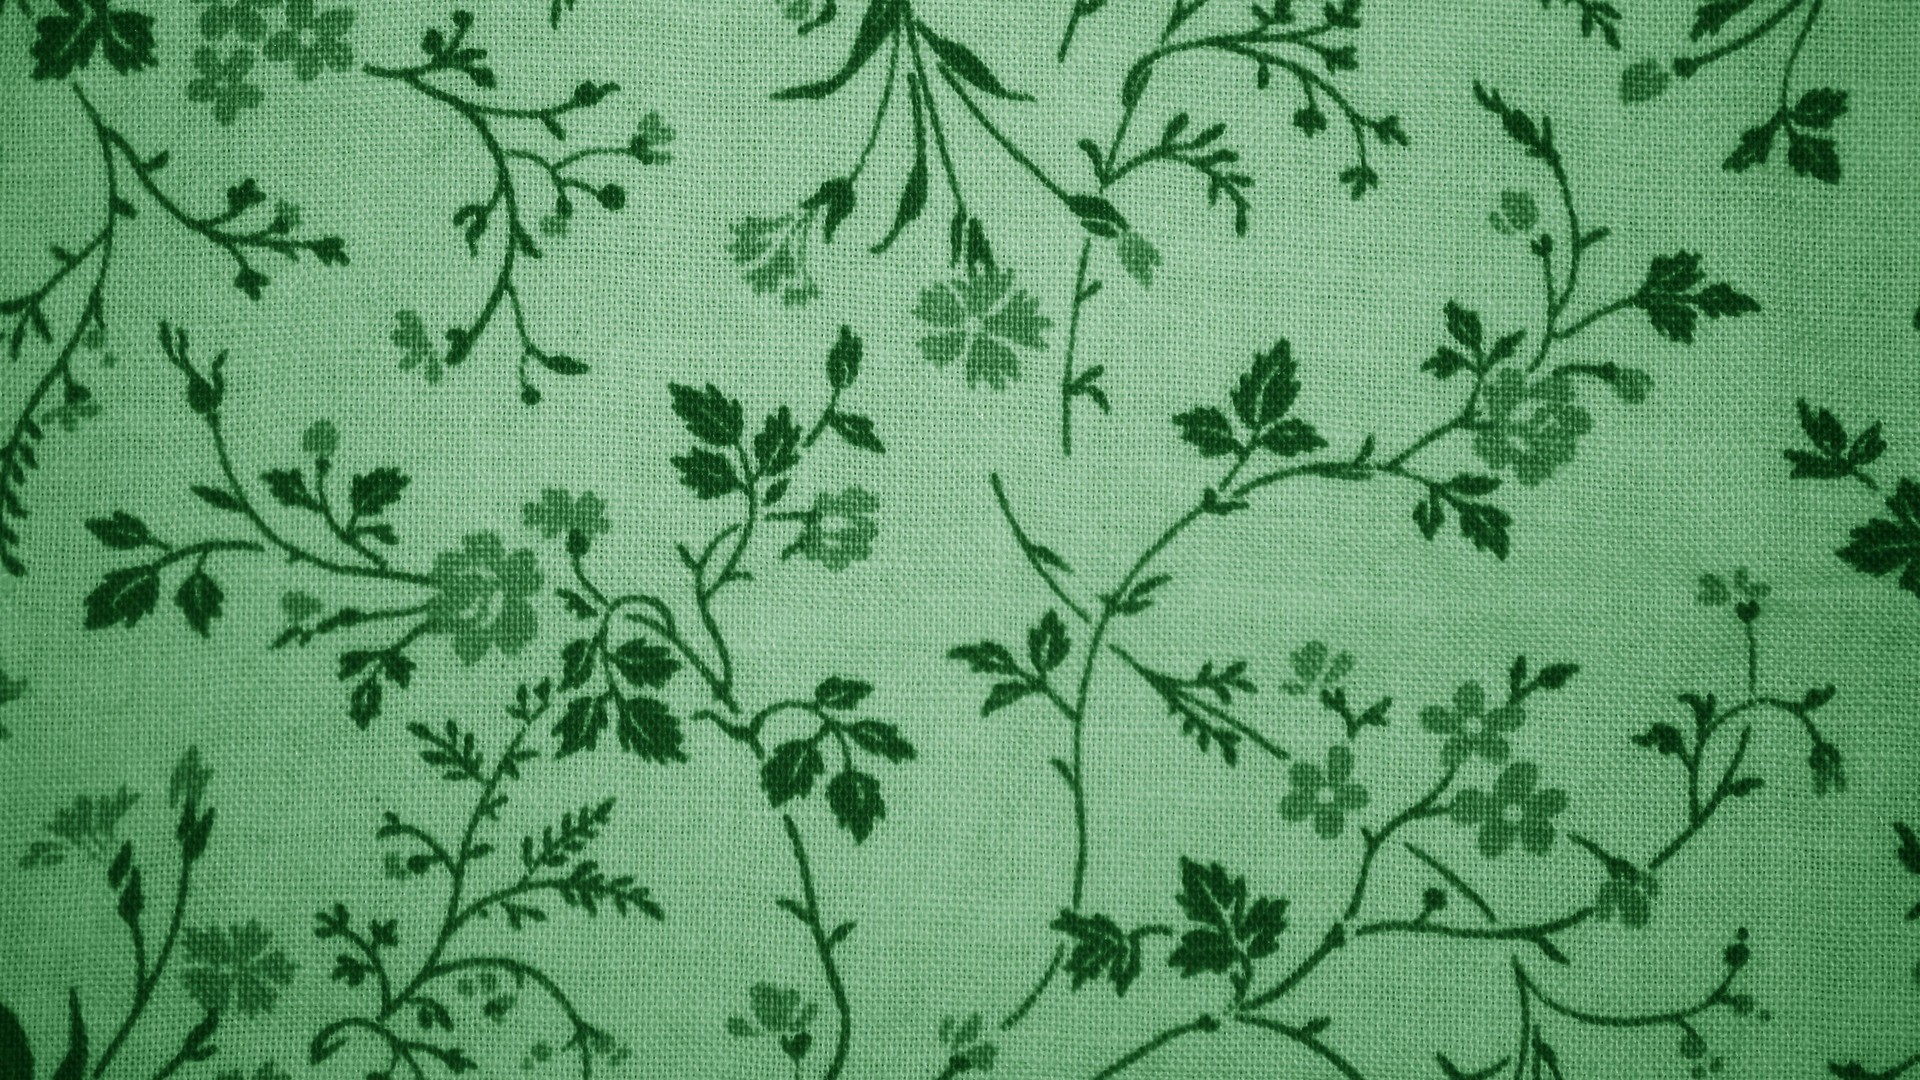 Green Colour Wallpaper with image resolution 1920x1080 pixel. You can use this wallpaper as background for your desktop Computer Screensavers, Android or iPhone smartphones